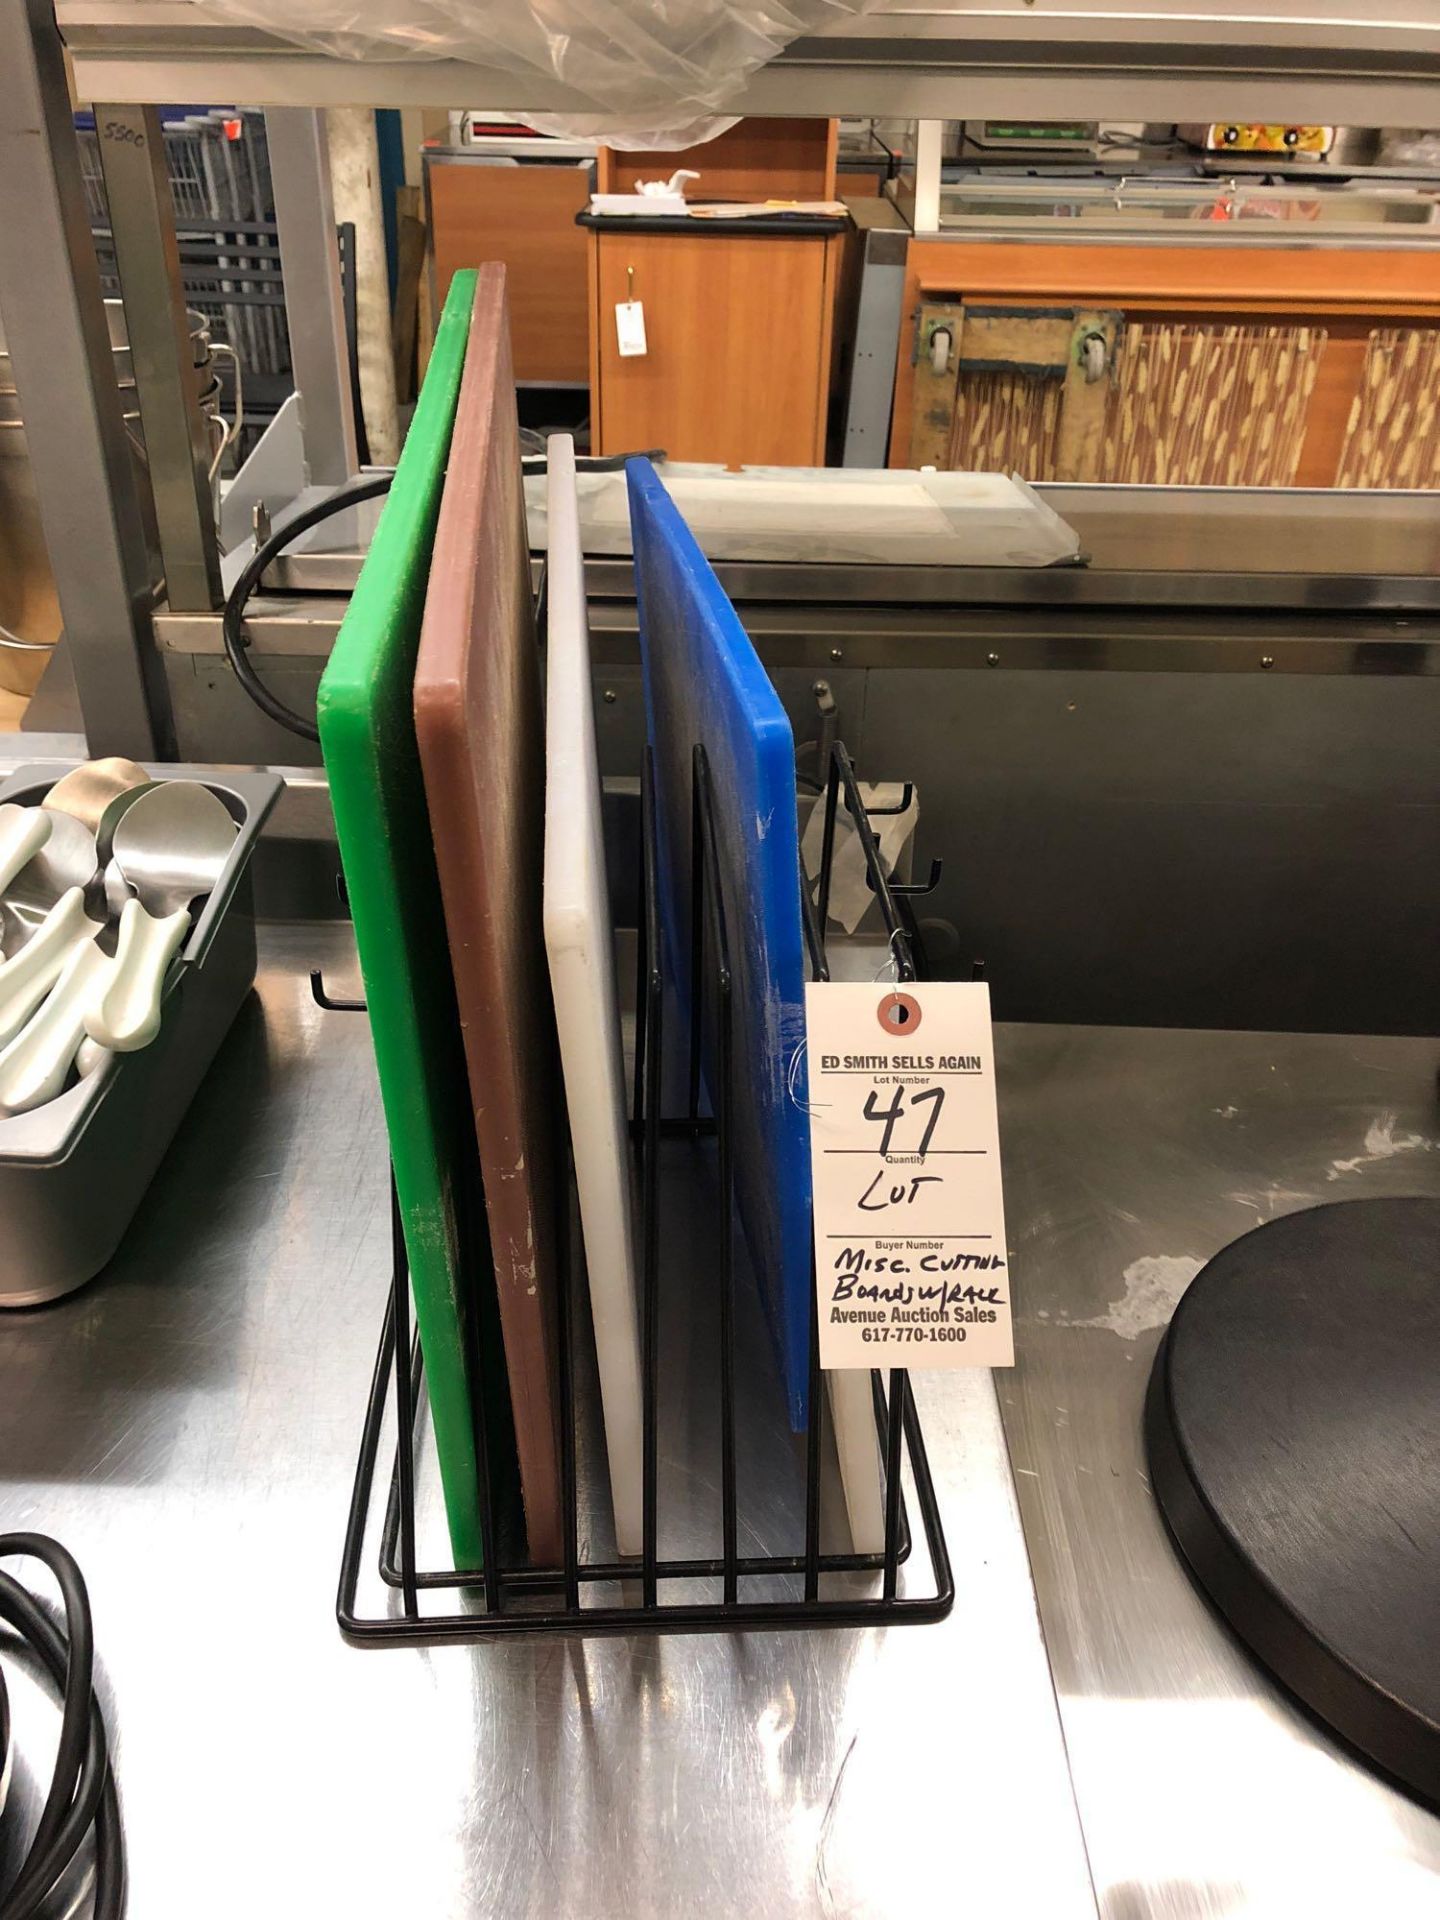 Lot miscellaneous cutting boards with rack